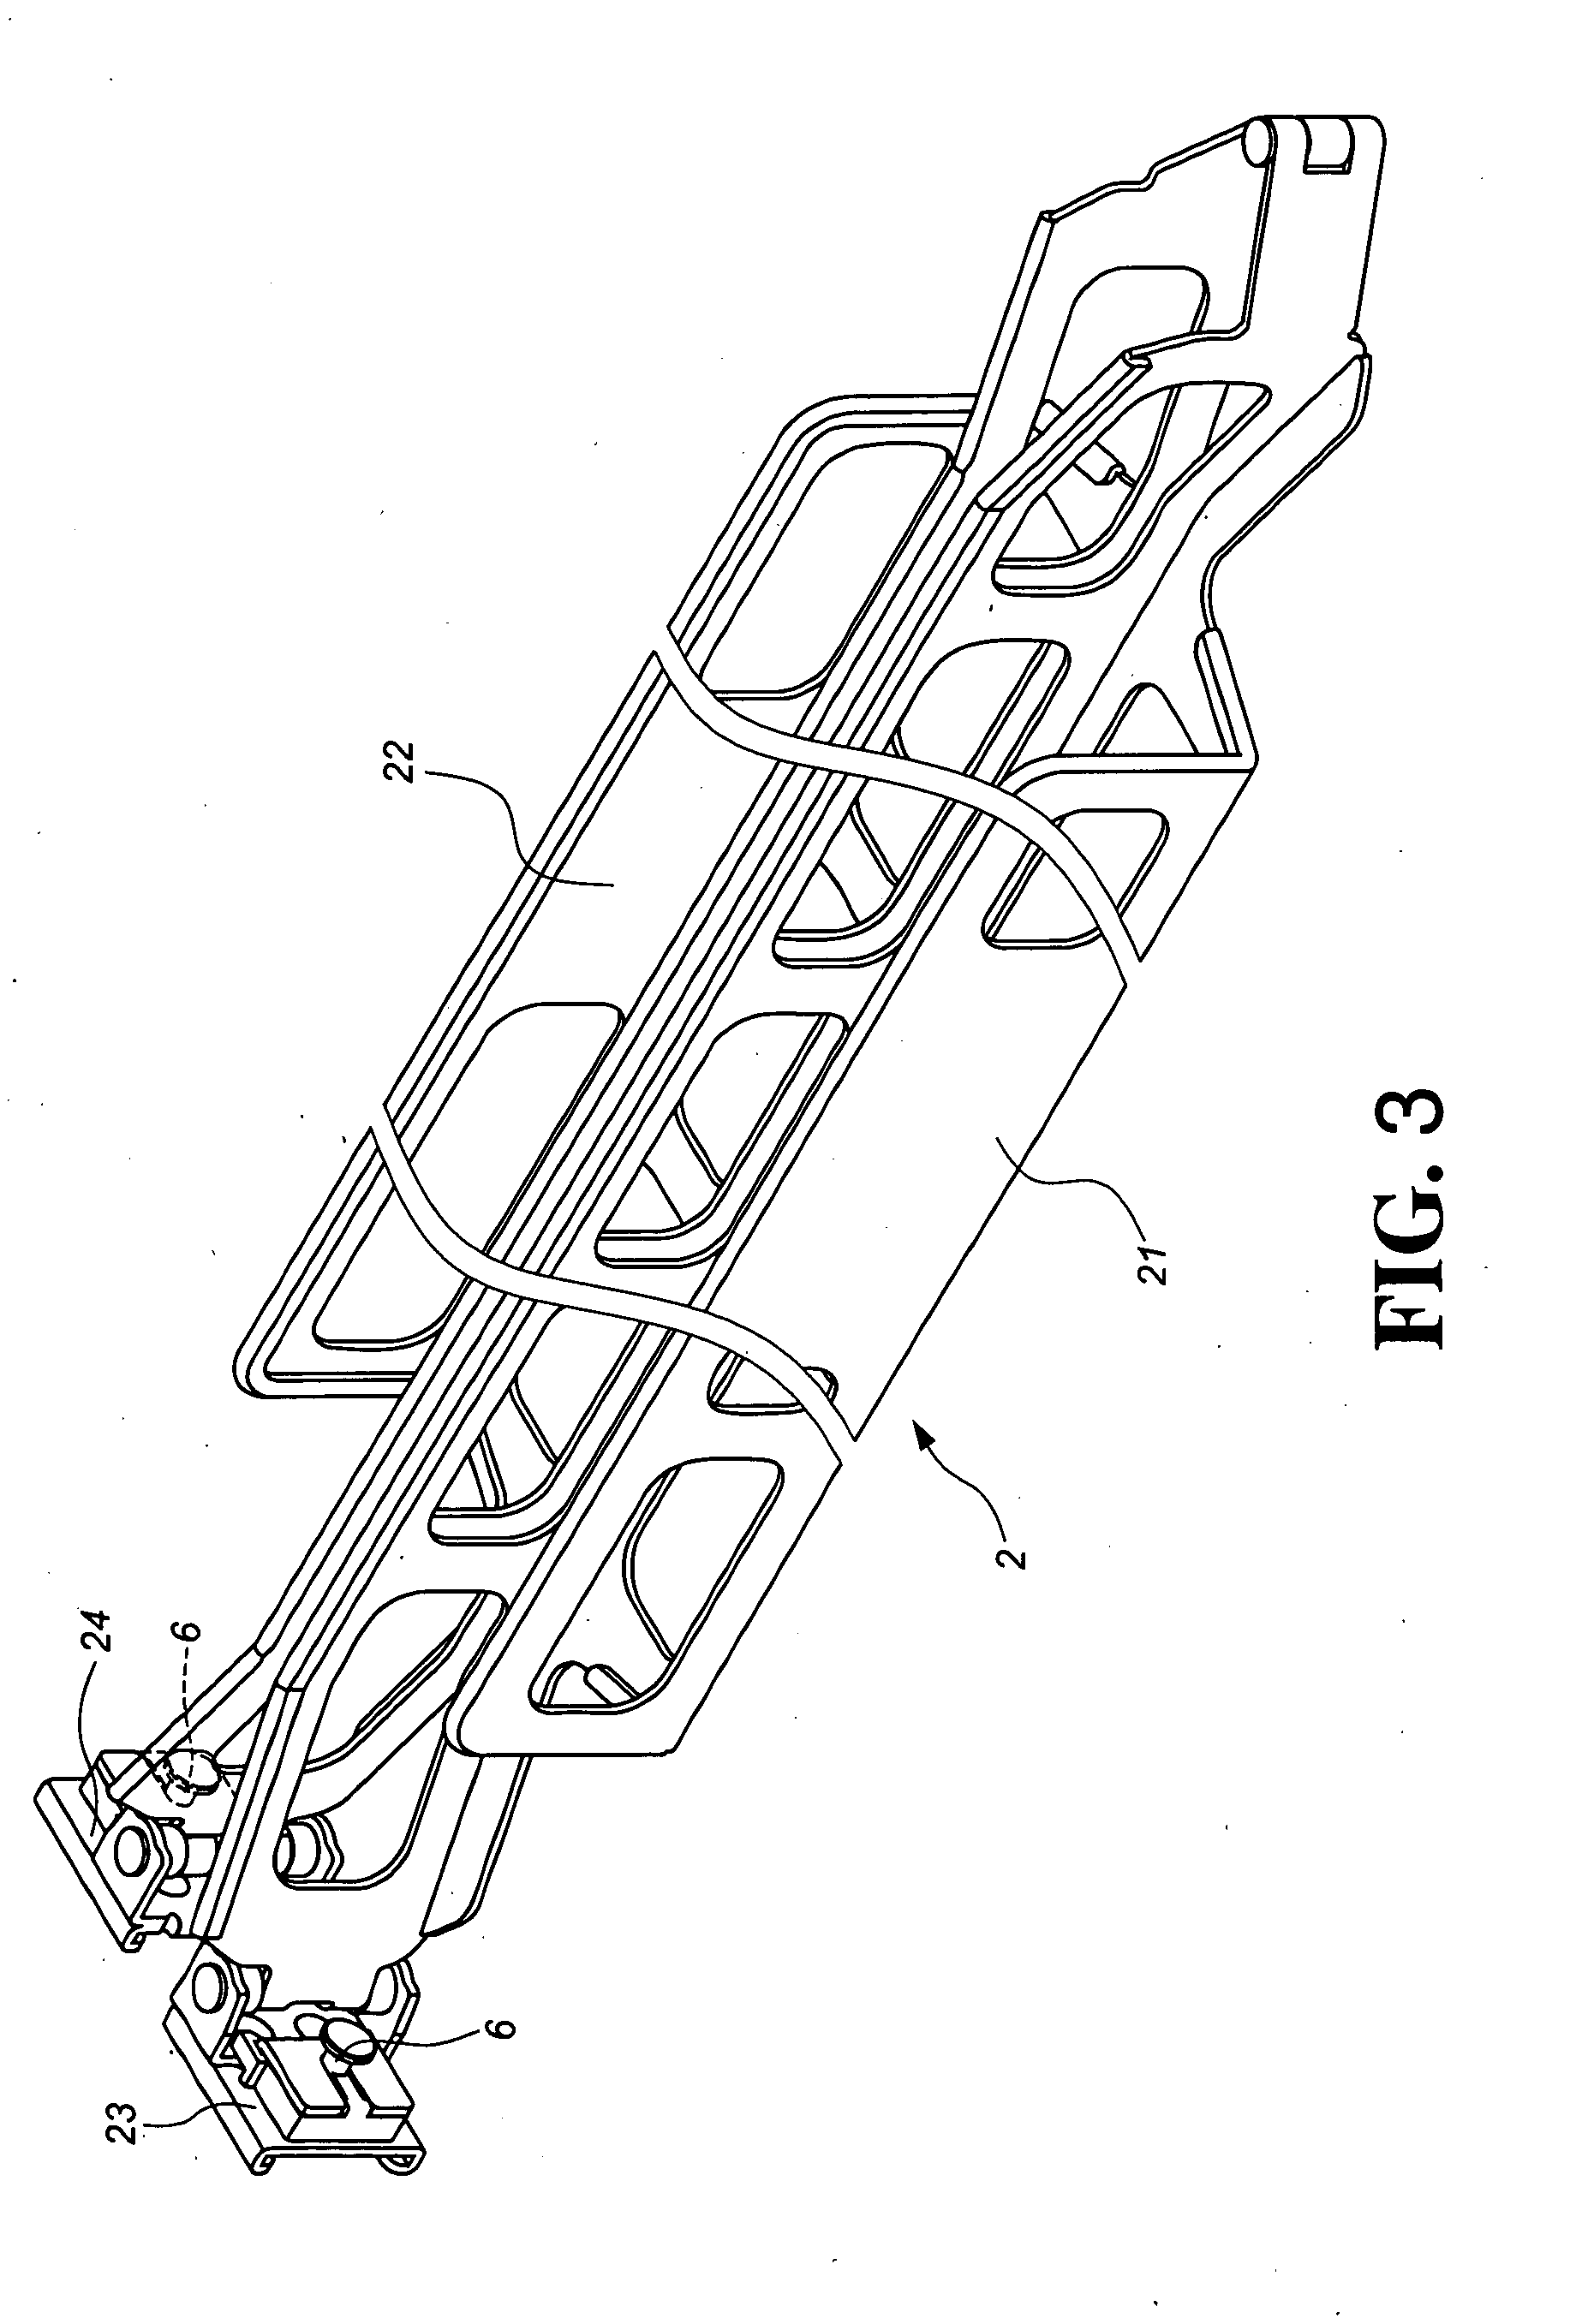 Cable management arm supporting device